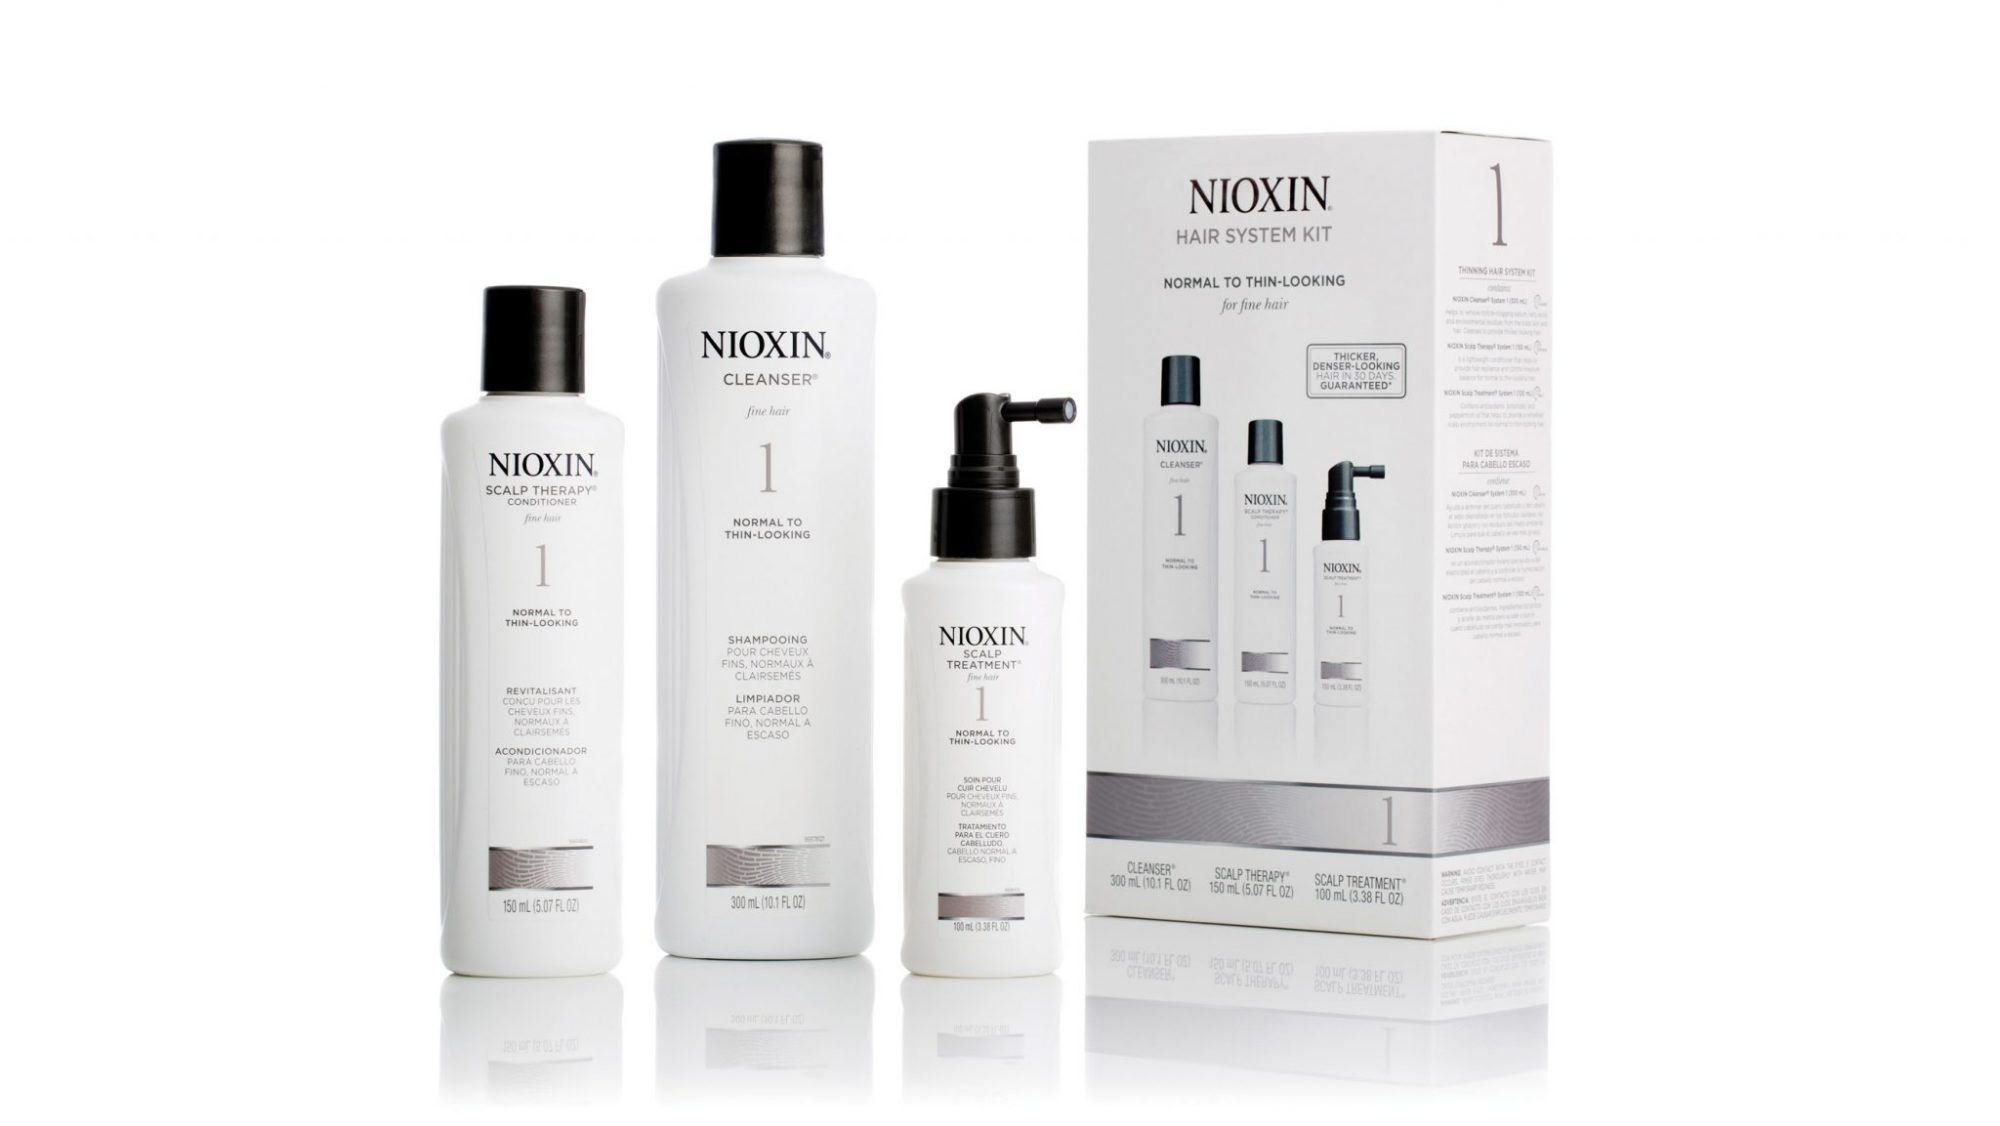 nioxin-kit-system-1-review